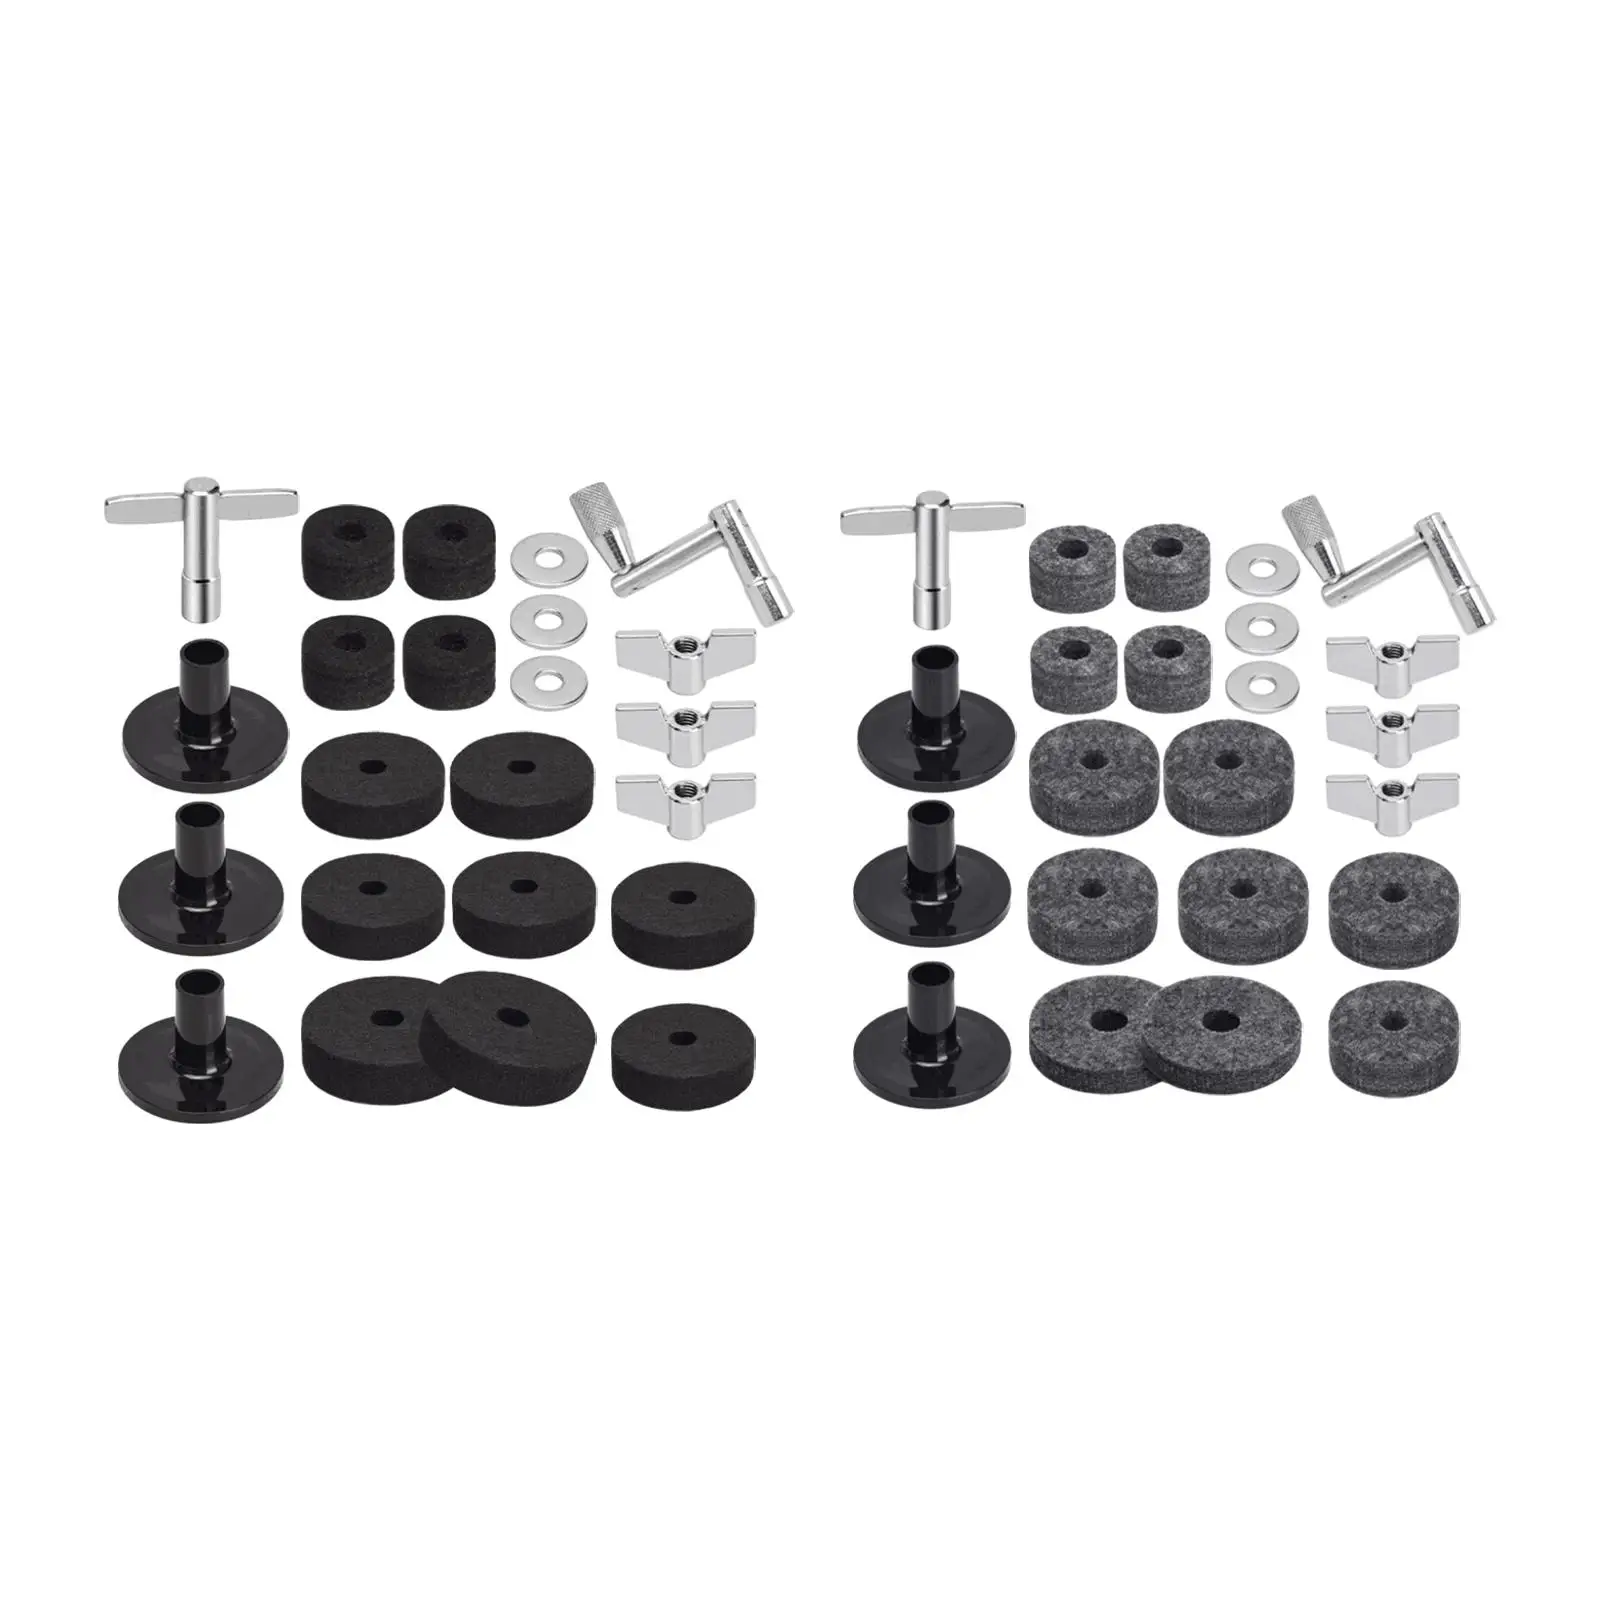 23 Pieces Cymbal Replacement Accessory for Drum Set Cymbal Sleeve and Felt